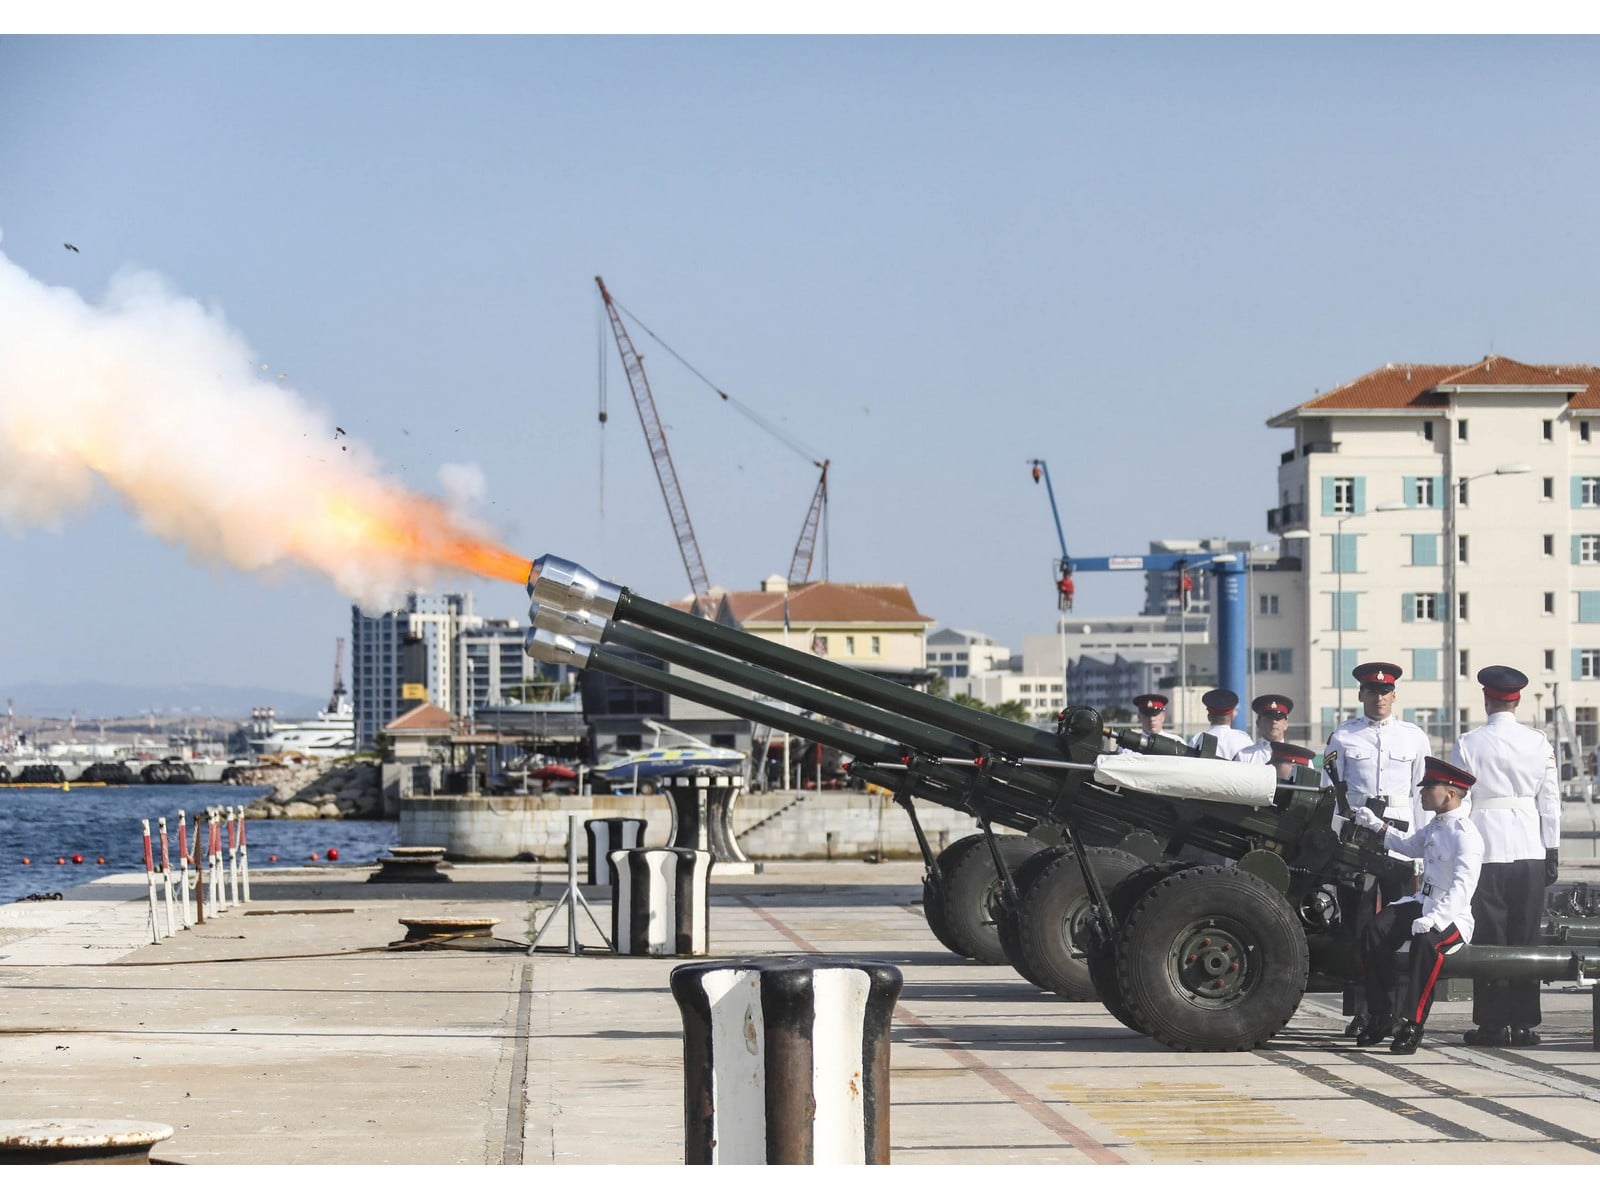 Ceremony of the Change of of  Commander British Forces in Gibraltar. Commodore Mike Walliker OBE RN, was replaced by commodore Tim Henry RN as CB.The ceremony was marked with a 11 gun salute outside The Tower HMNB Gibraltar hosted by the Royal Gibraltar Regiment.